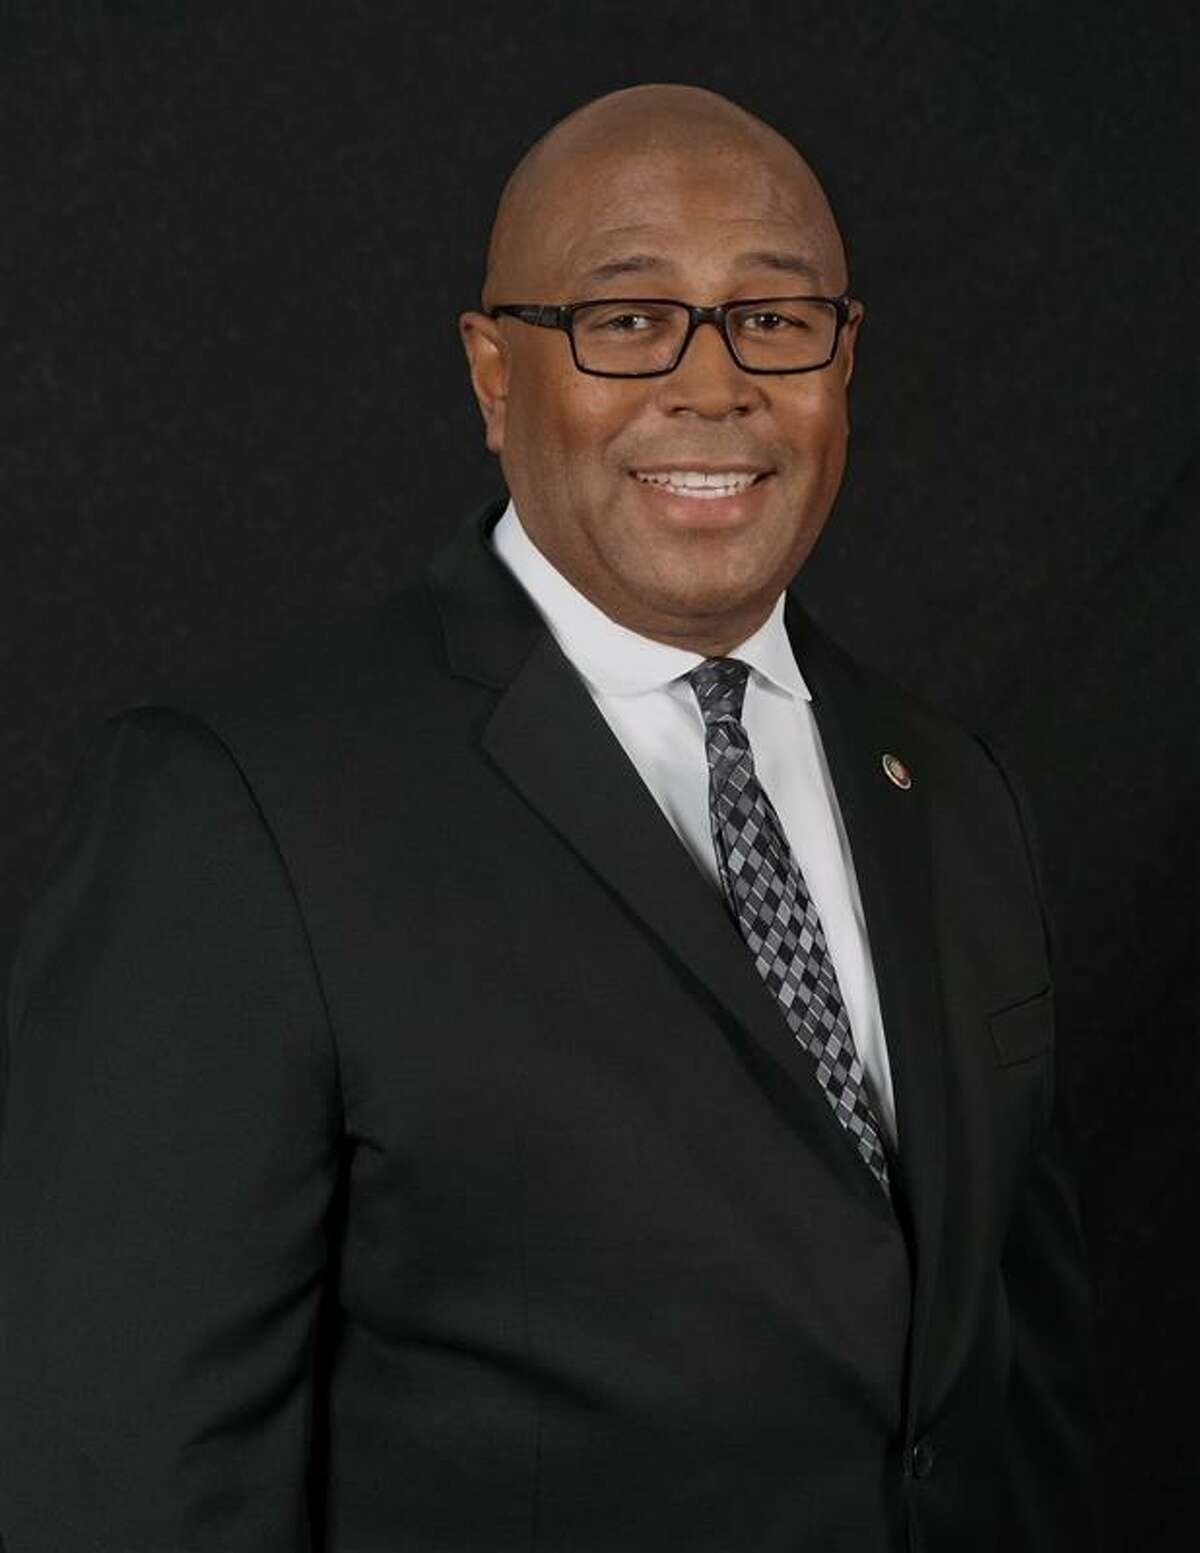 Kenneth Williams will be Beaumont's first Black city manager.